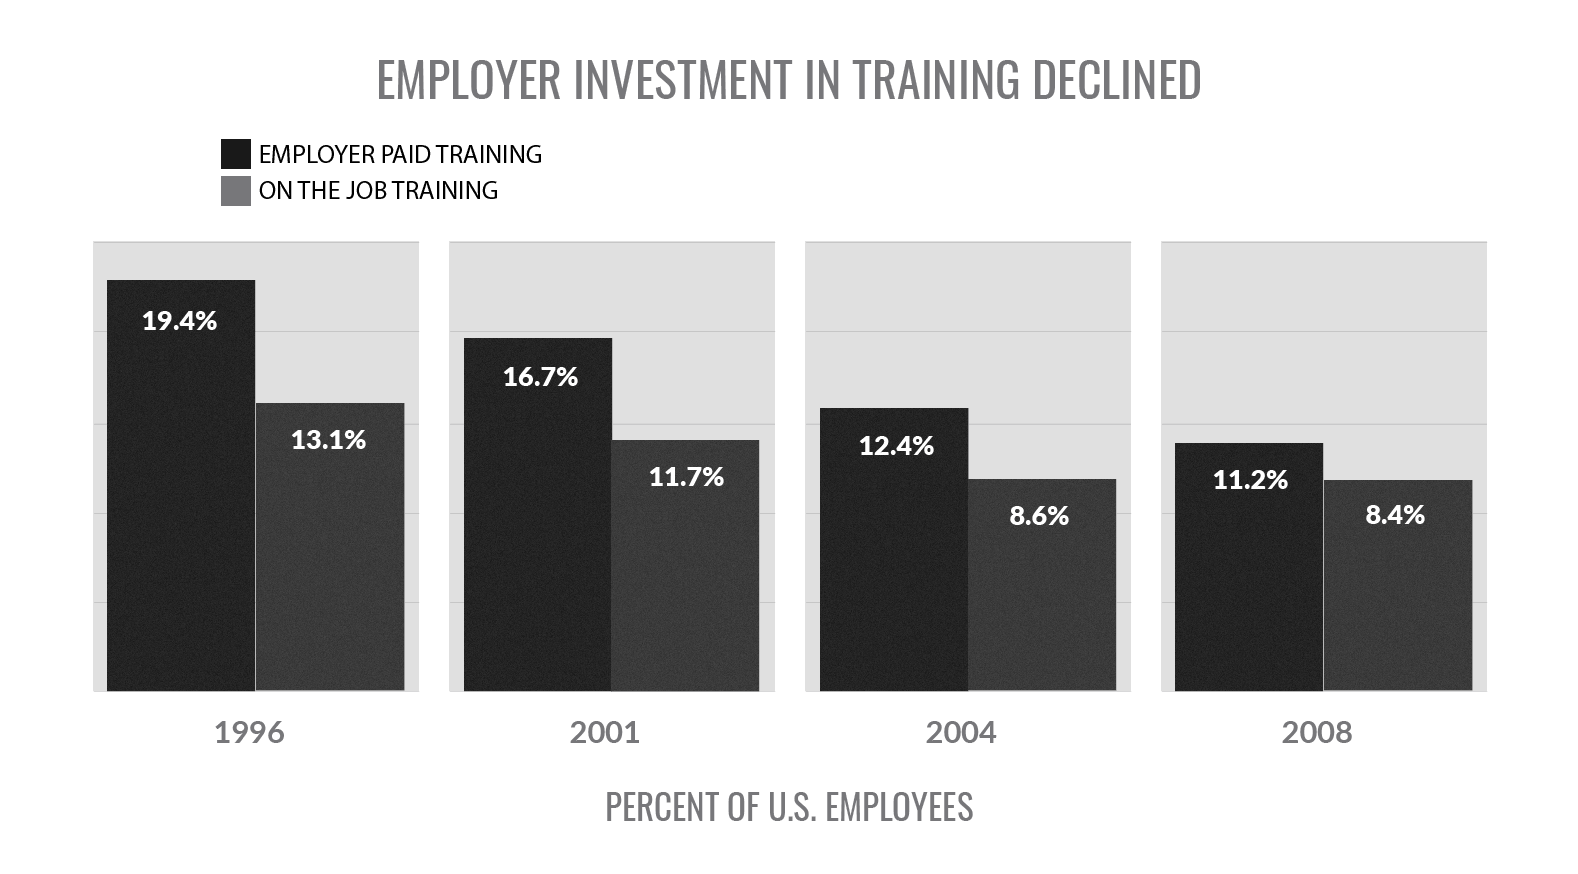 Bar graph showing the decline in employee training from 1996 to 2008